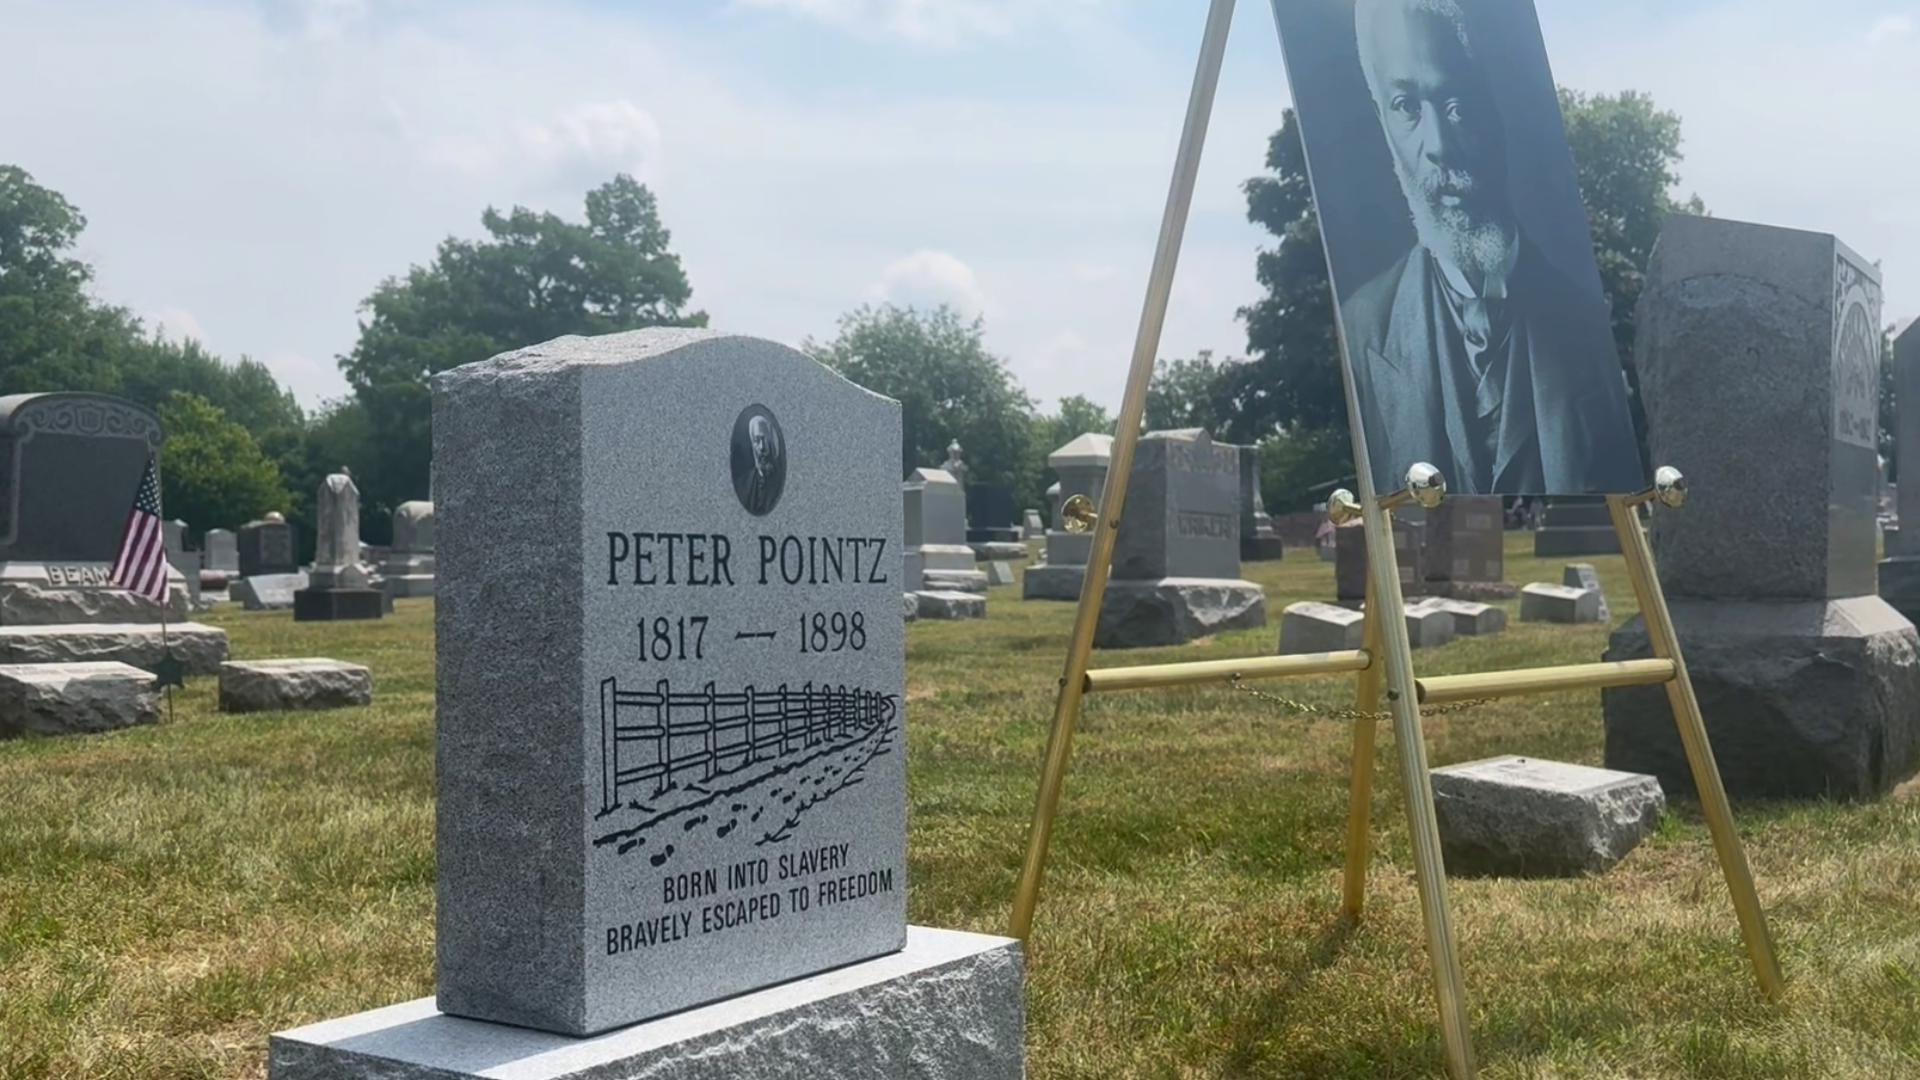 Peter Pointz escaped slavery and settled in Ohio. He became a beloved member of the Clyde community and was known as "Uncle Peter."